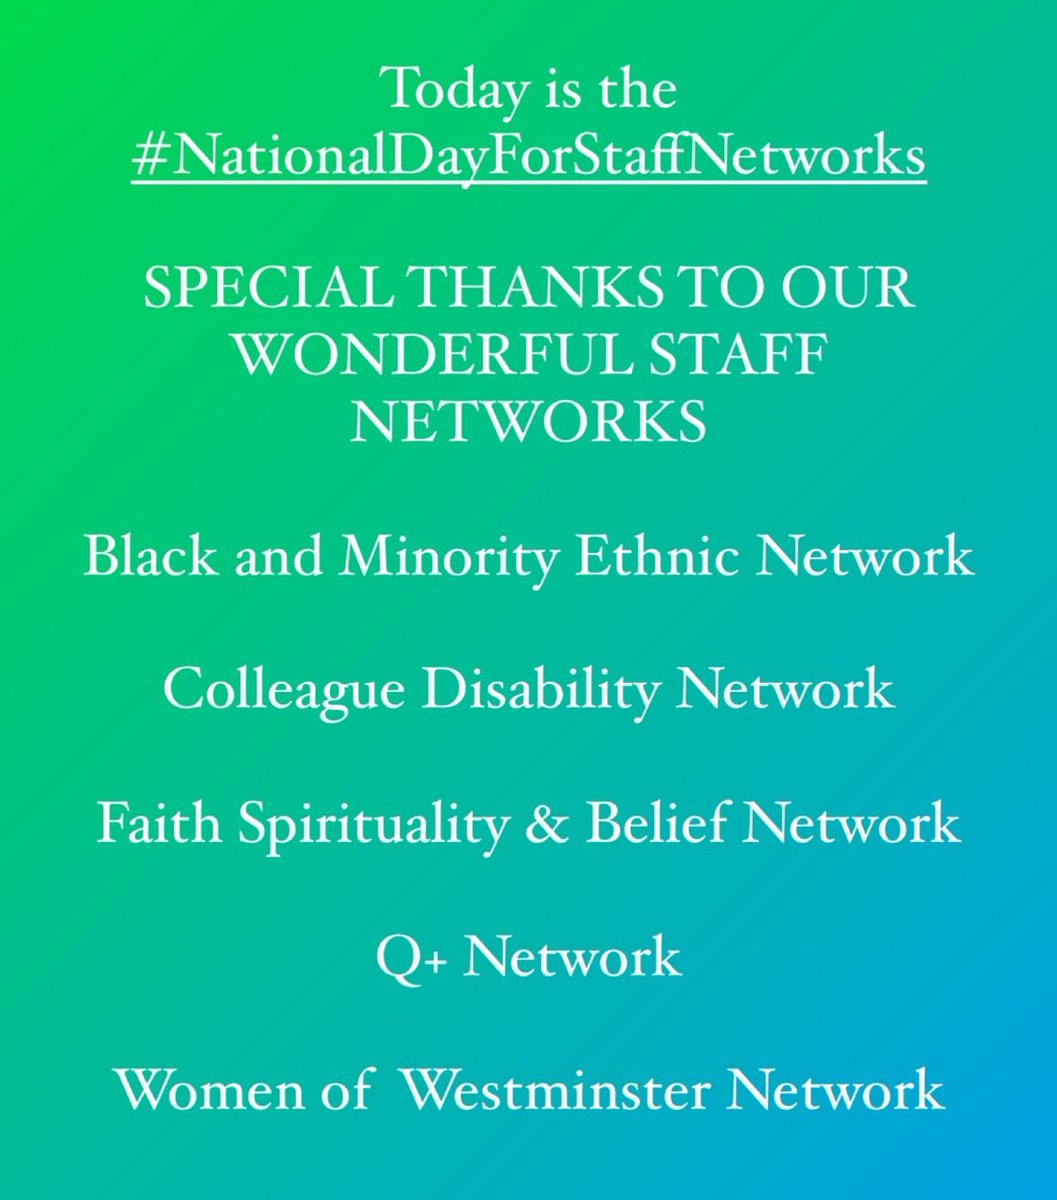 Grateful for the dedication of our university's staff networks on this National Day of Staff Networks. Thank you for fostering inclusivity and belonging. #EDI #WeAreWestminster